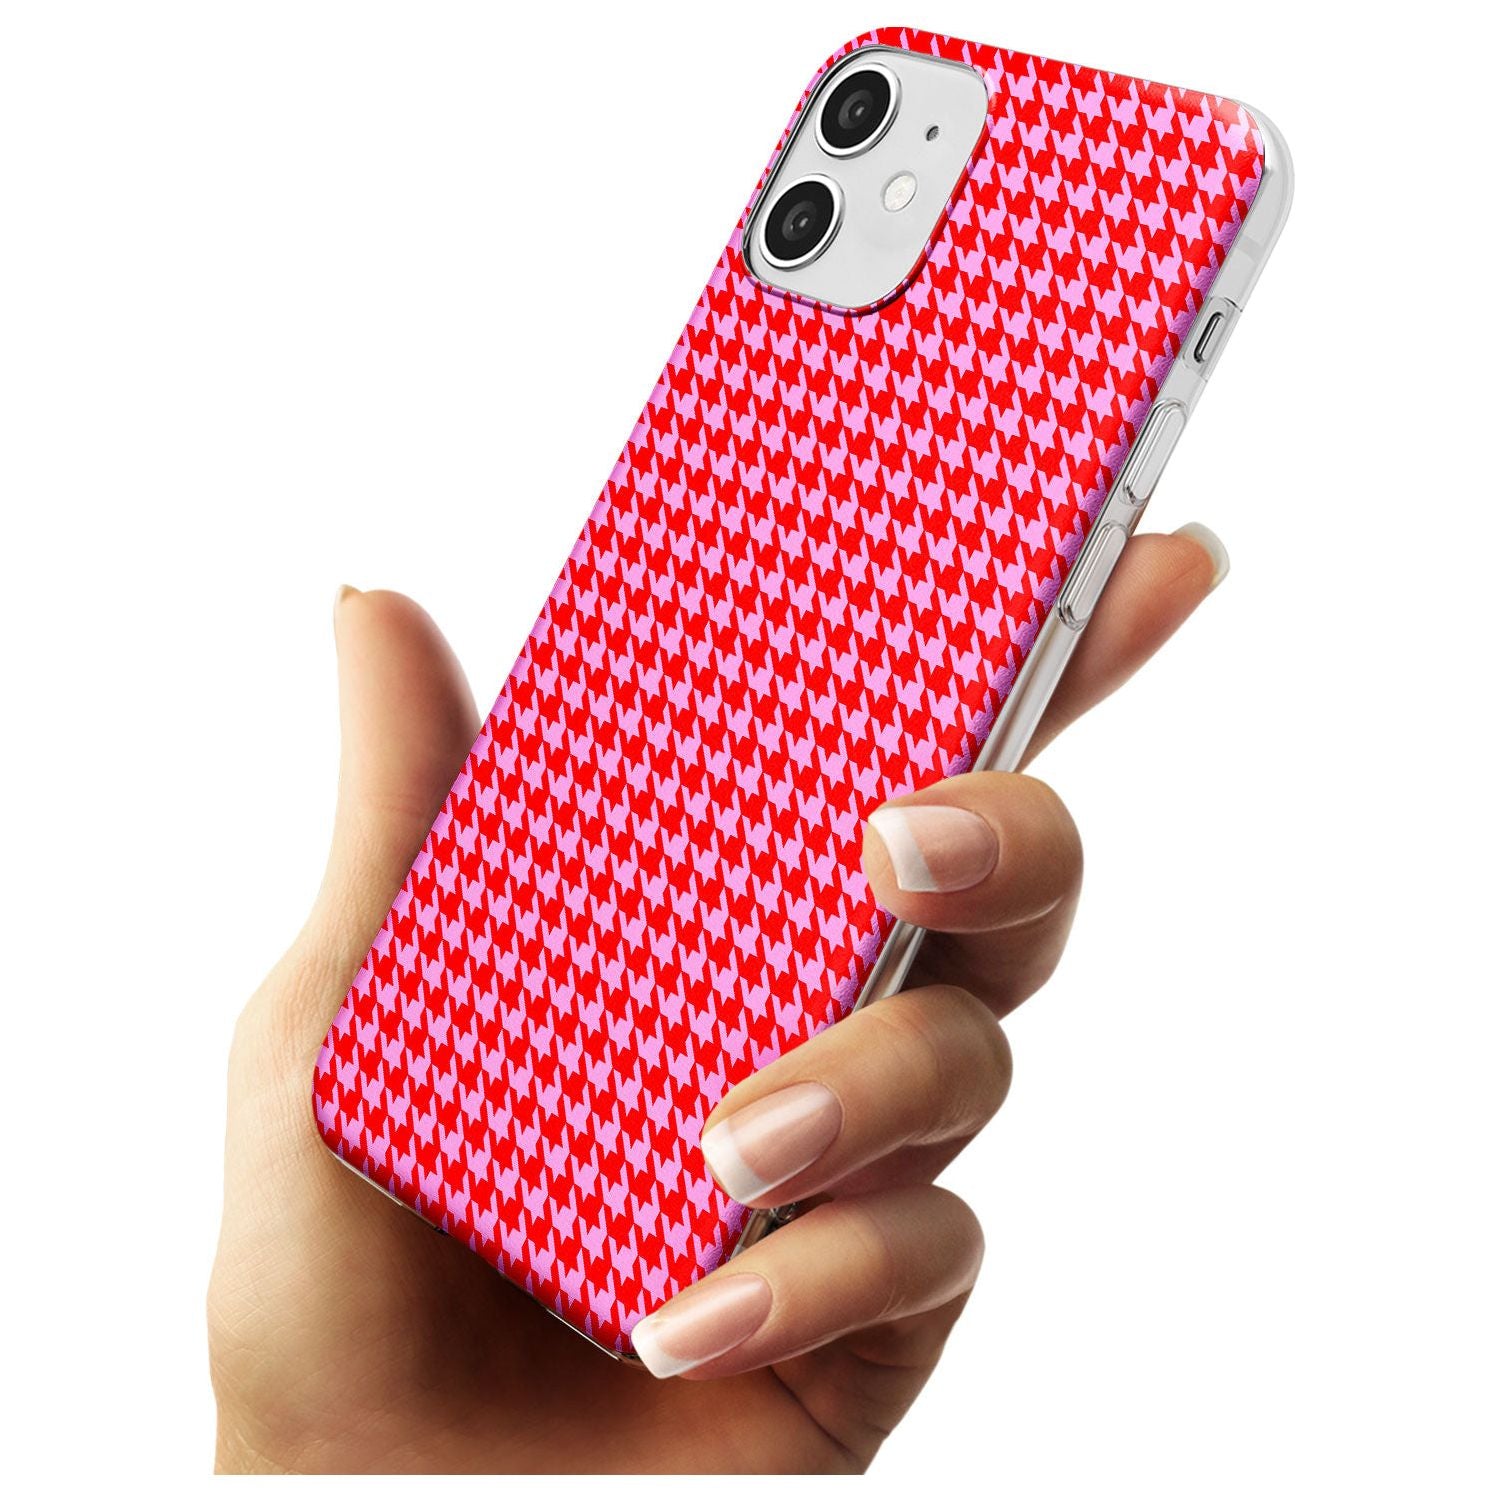 Neon Pink & Red Houndstooth Pattern Slim TPU Phone Case for iPhone 11